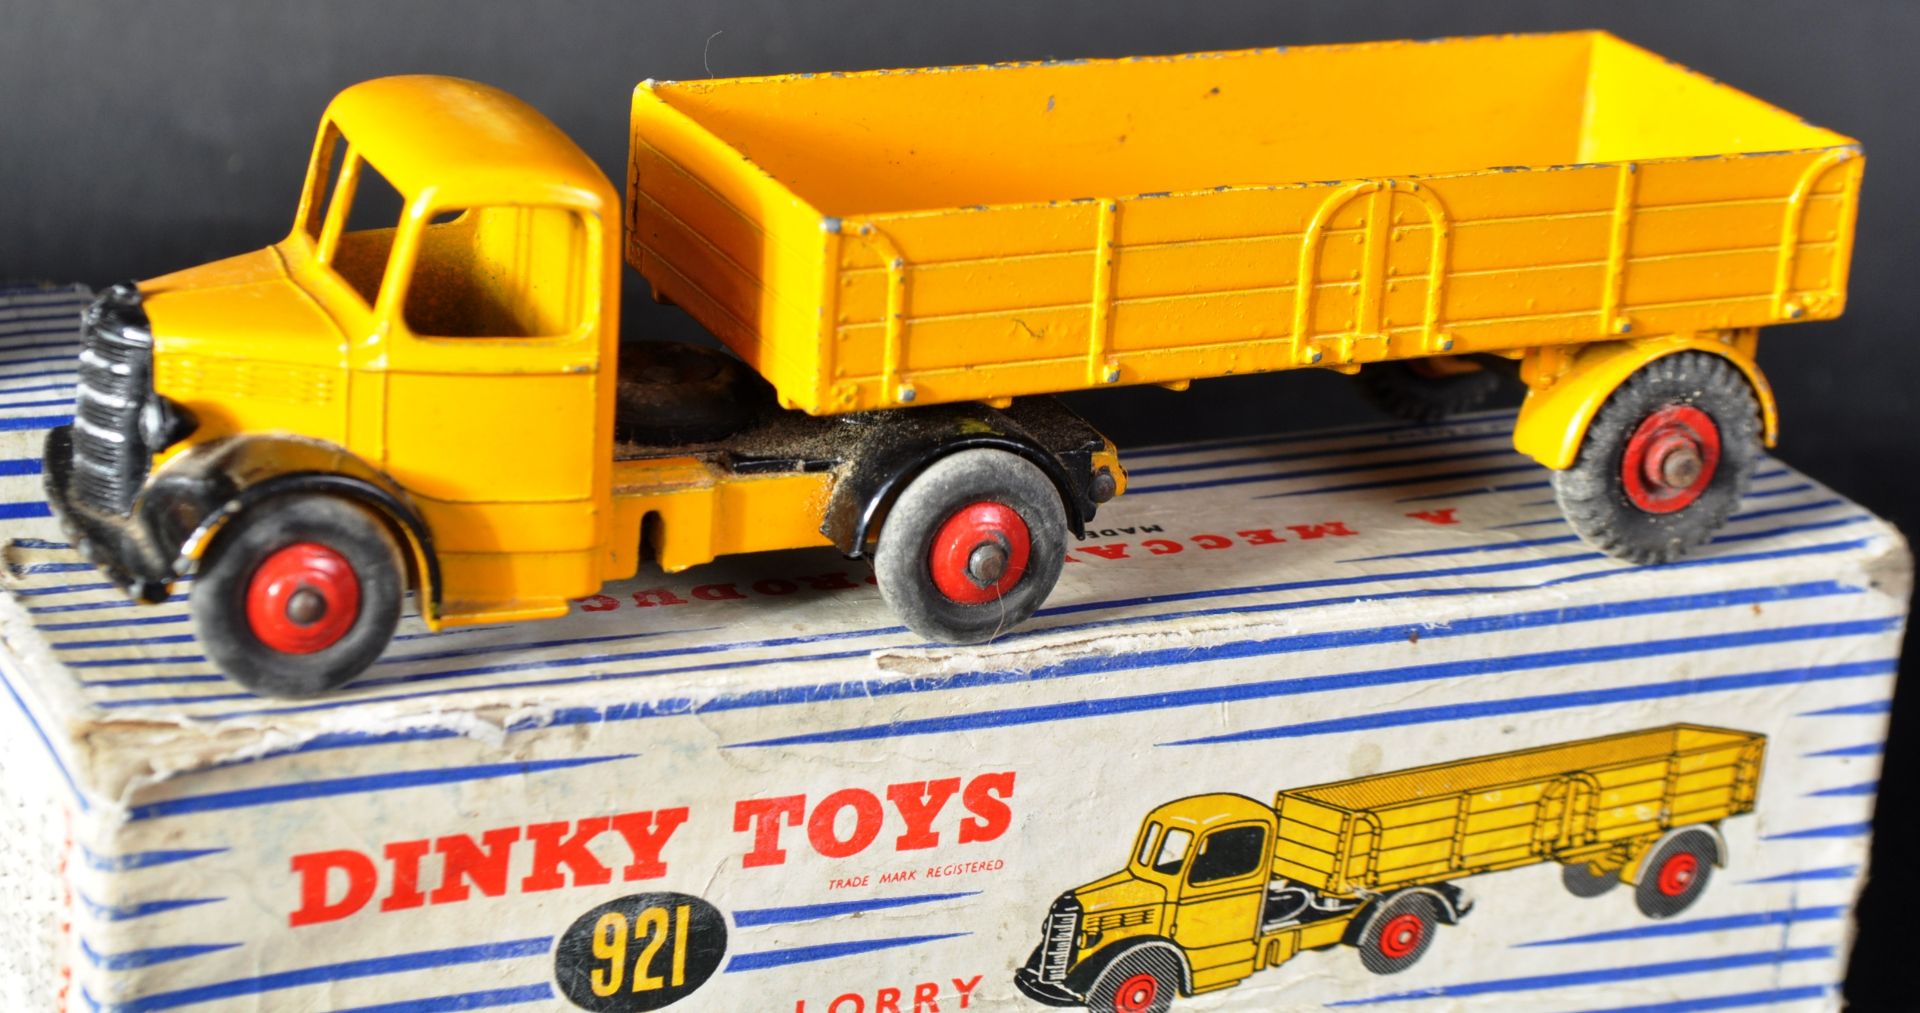 TWO VINTAGE DINKY TOYS BOXED DIECAST MODEL TRUCKS - Image 4 of 8